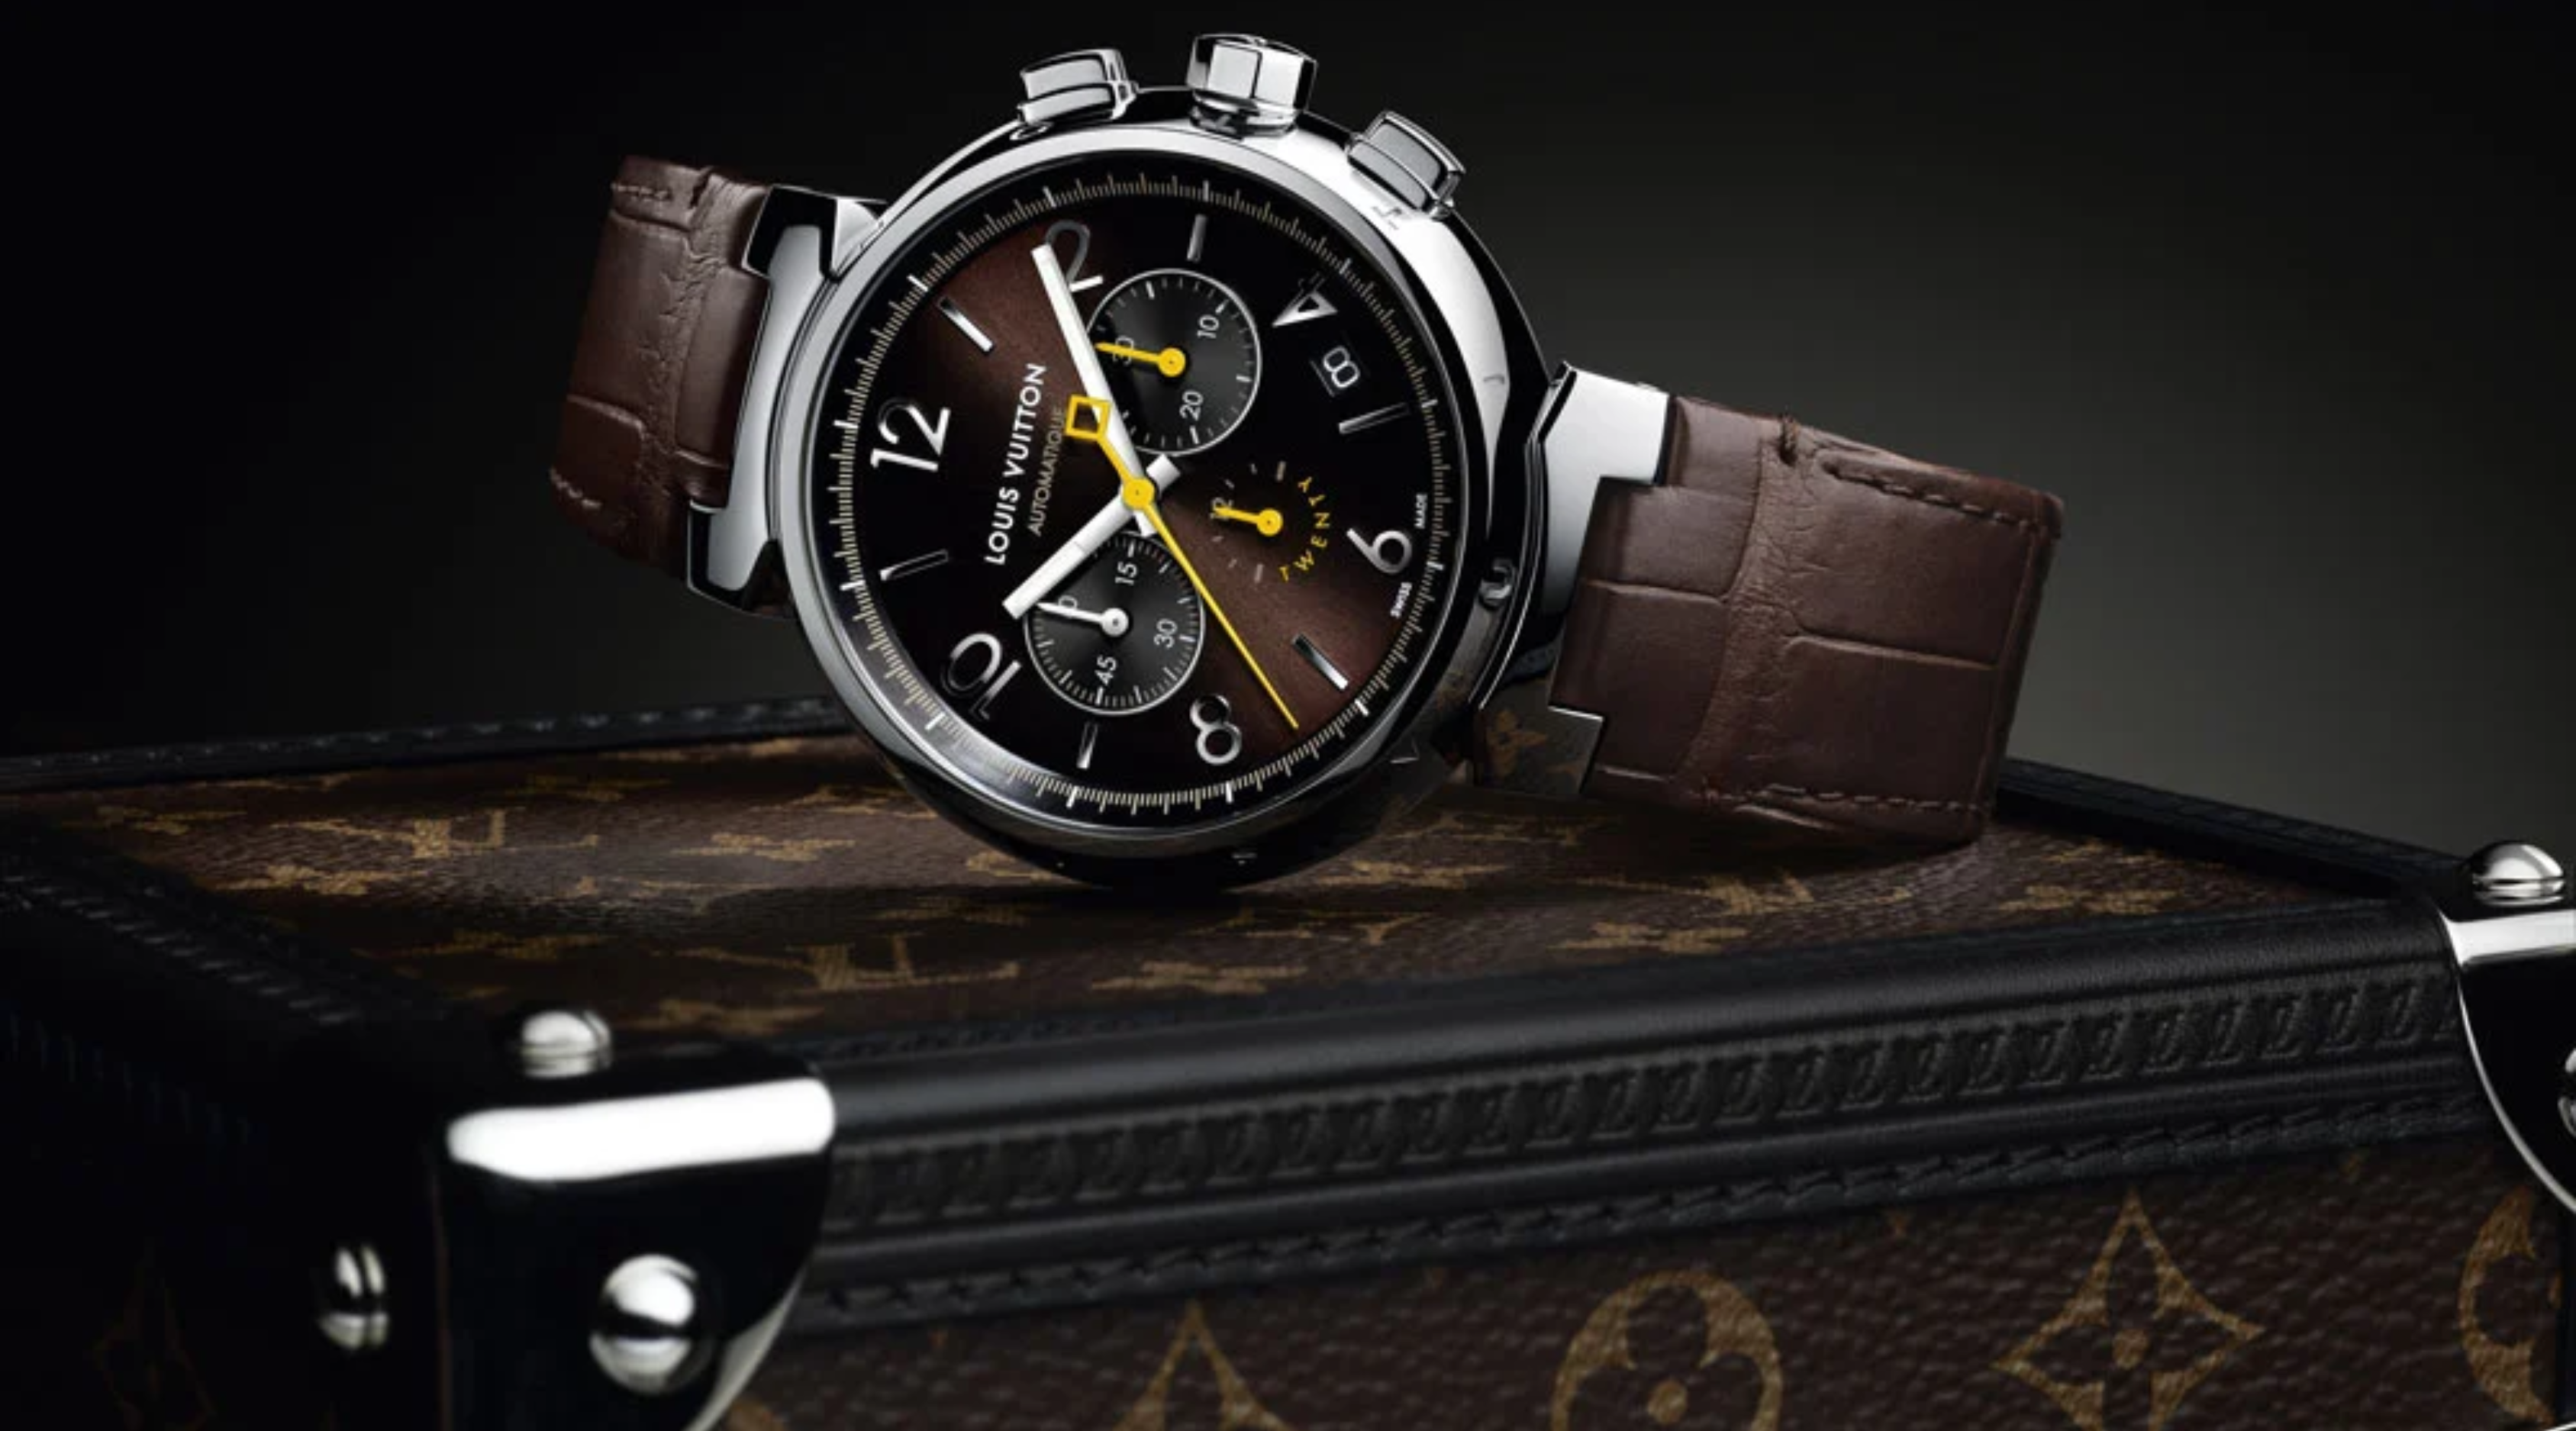 Article: Get a Glimpse at the Louis Vuitton Tambour Book